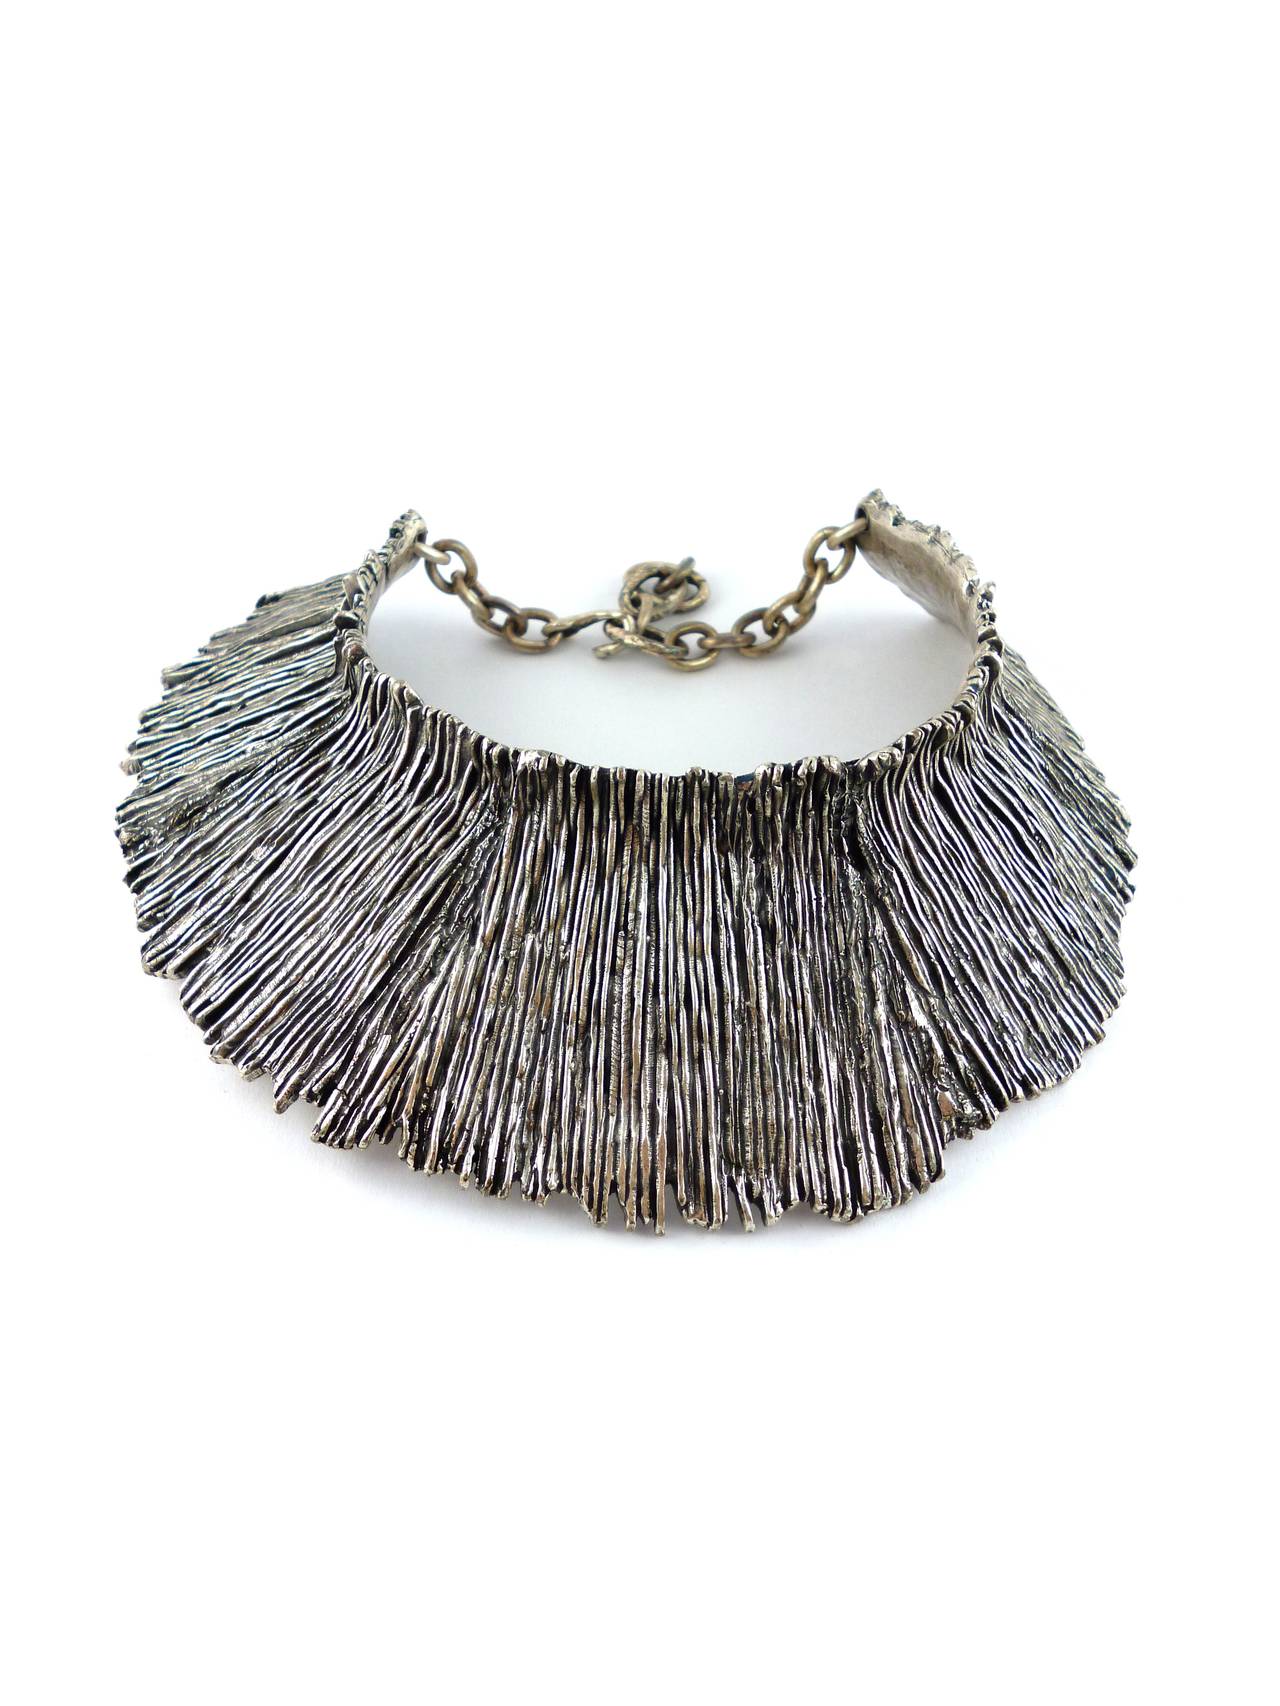 BICHE DE BERE Paris asymetrcial massive brutalist metal collar necklace.

Deeply ribbed silver tone metal giving a stunning abstract 